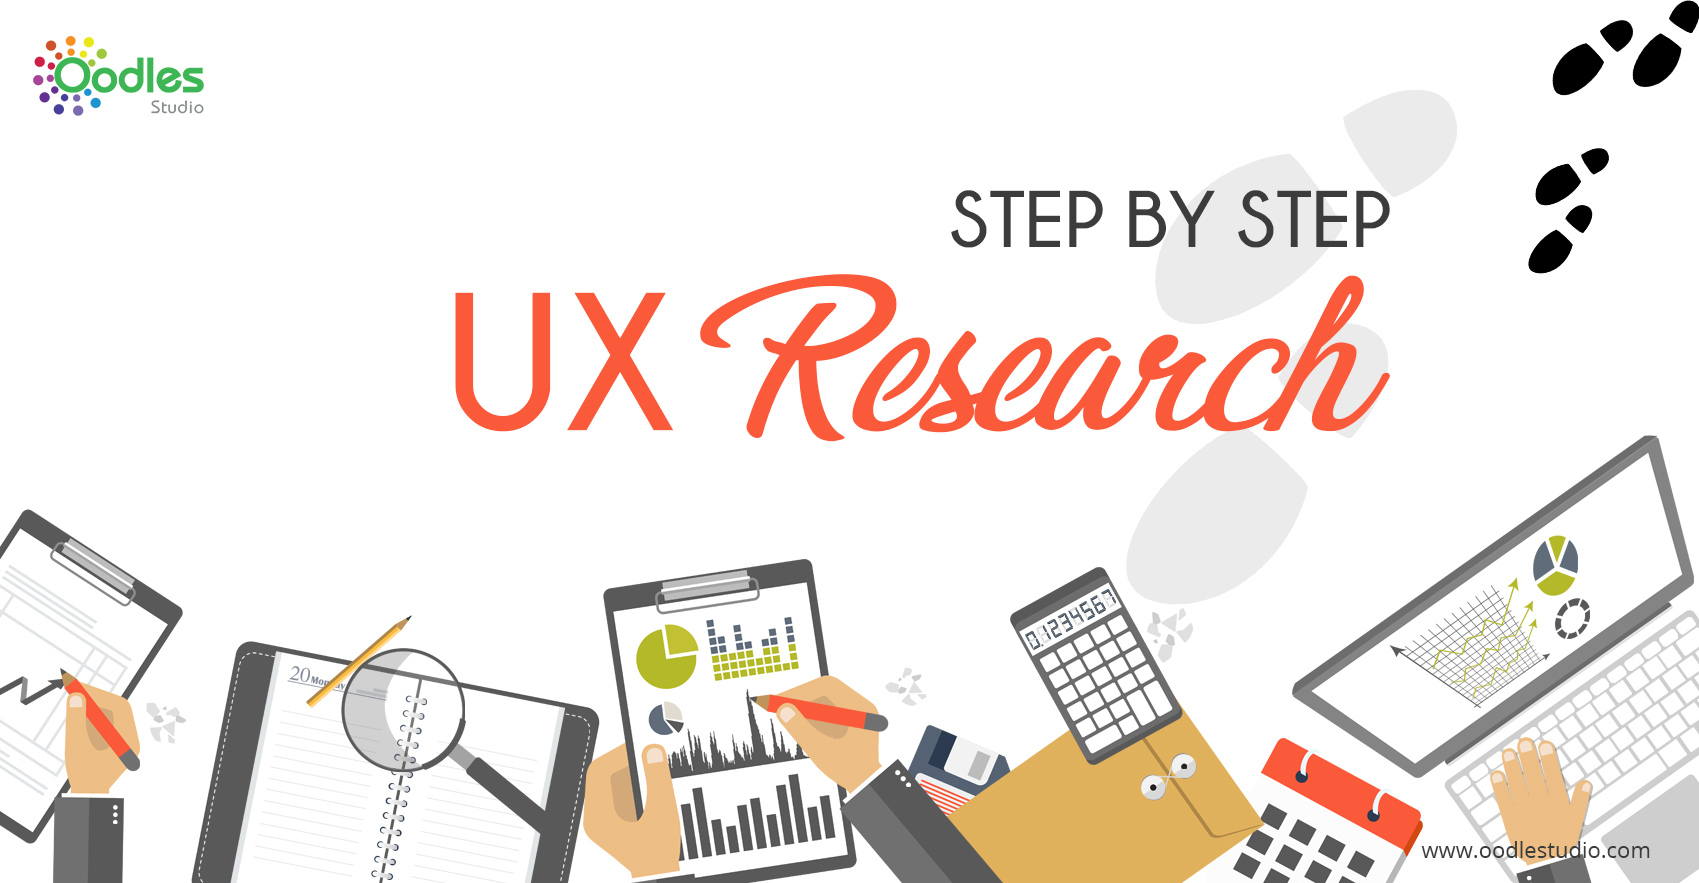 user experience design research product